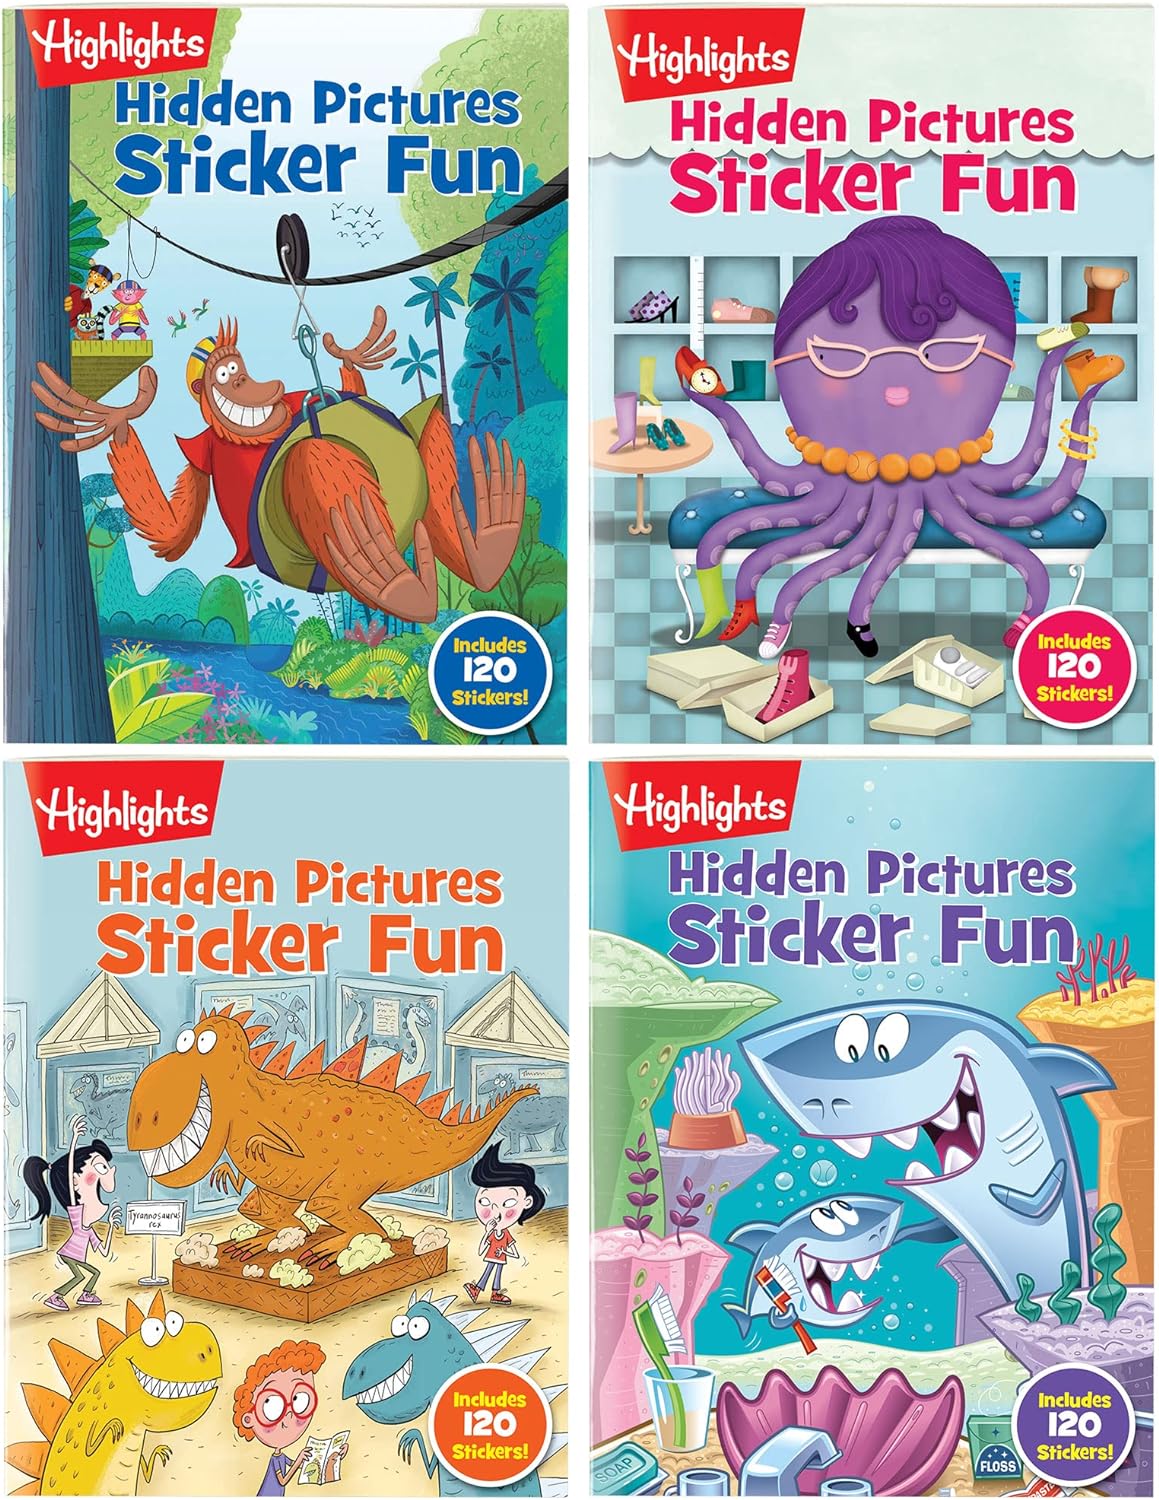 Highlights for Children Hidden Pictures Sticker Fun Sticker Books for Kids Ages 3-6, 4-Pack, 64 Pages - Volume 1